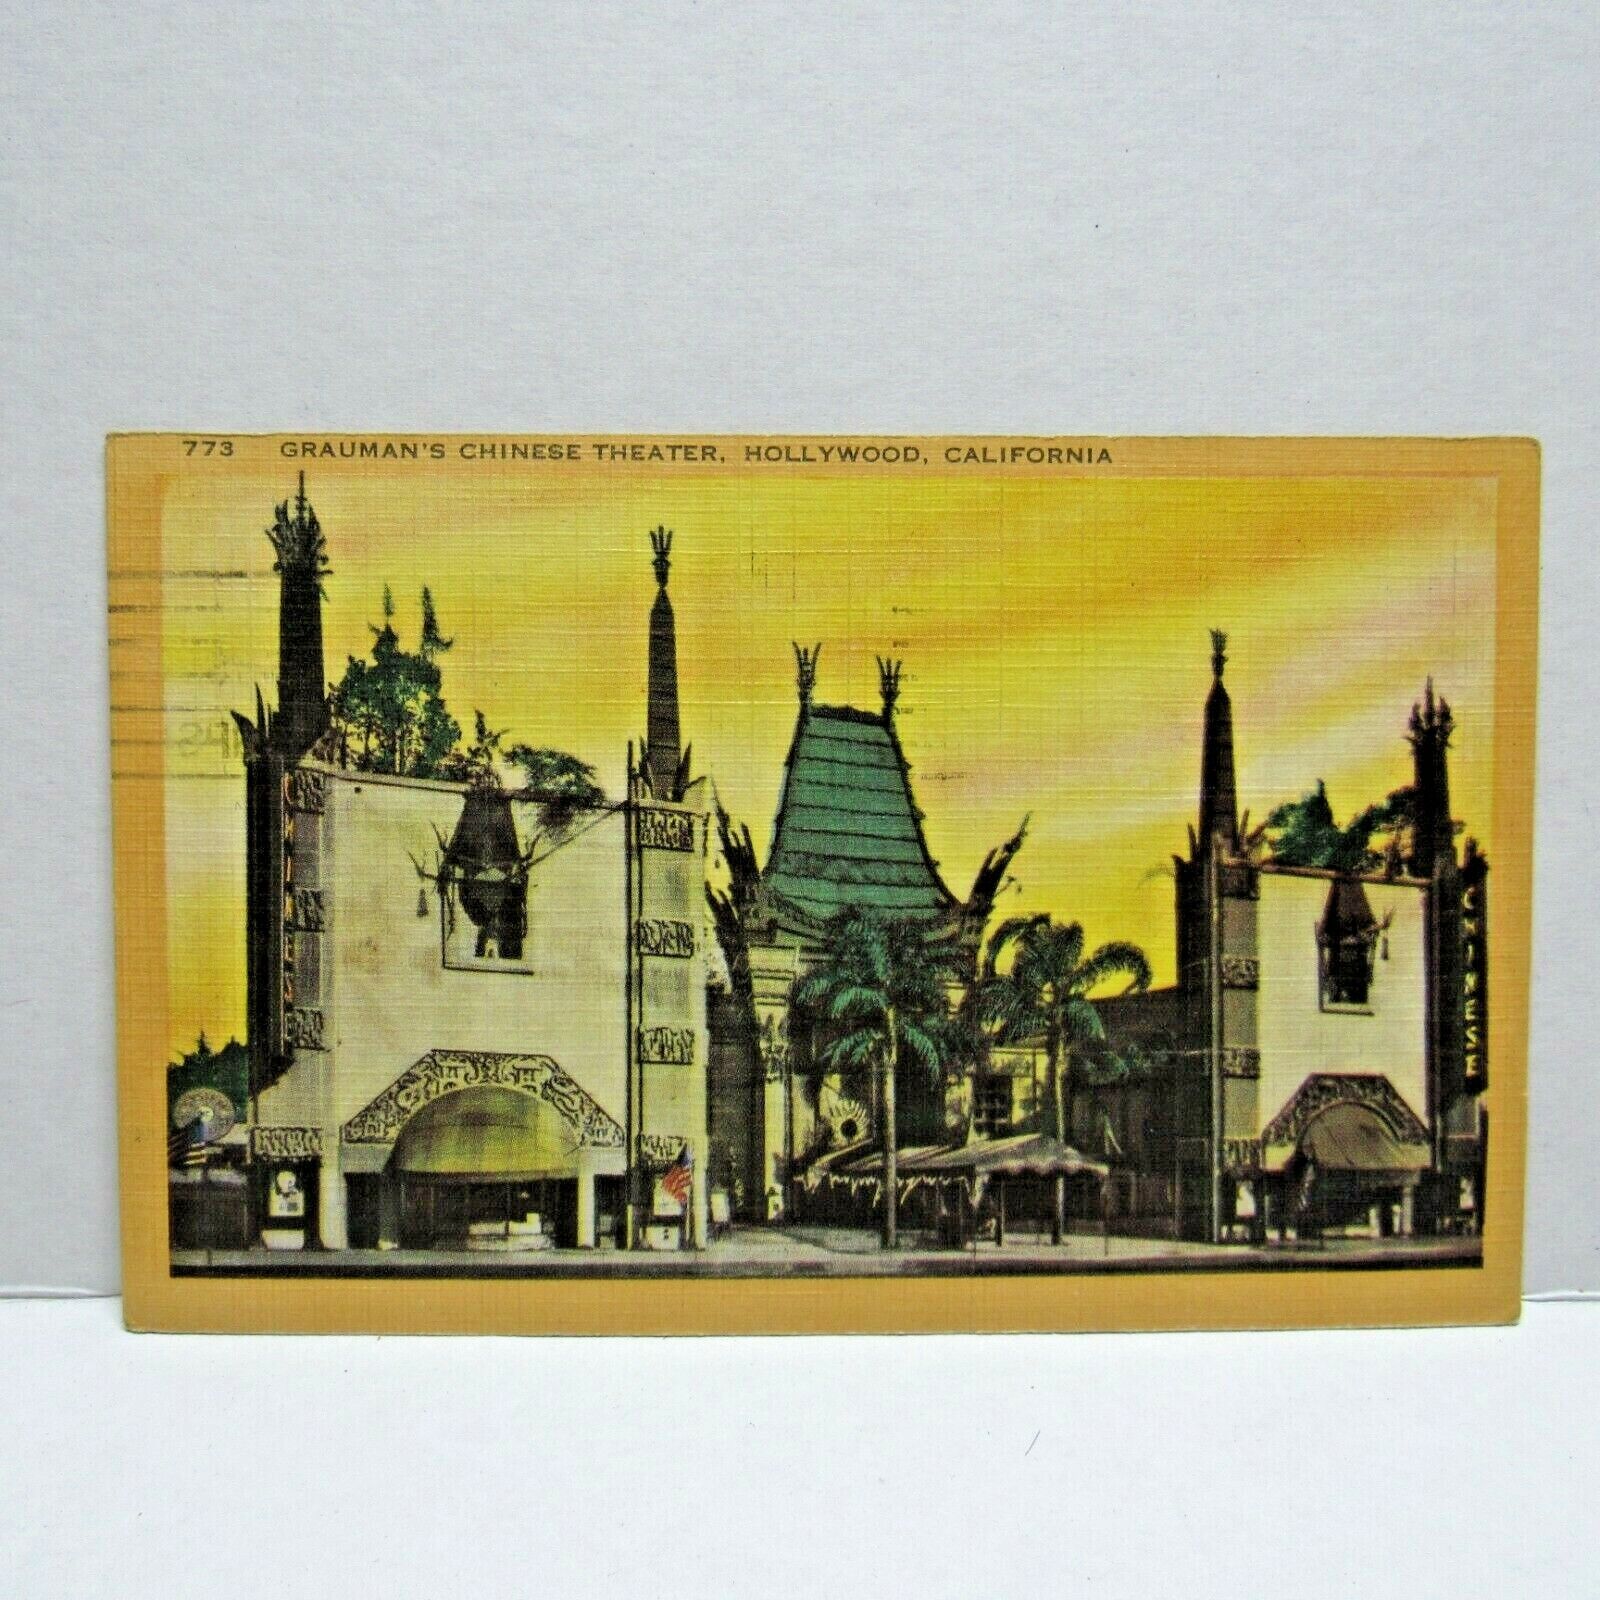 Postcard Vintage Postmarked 1943 Grauman's Chinese Theater Hollywood California